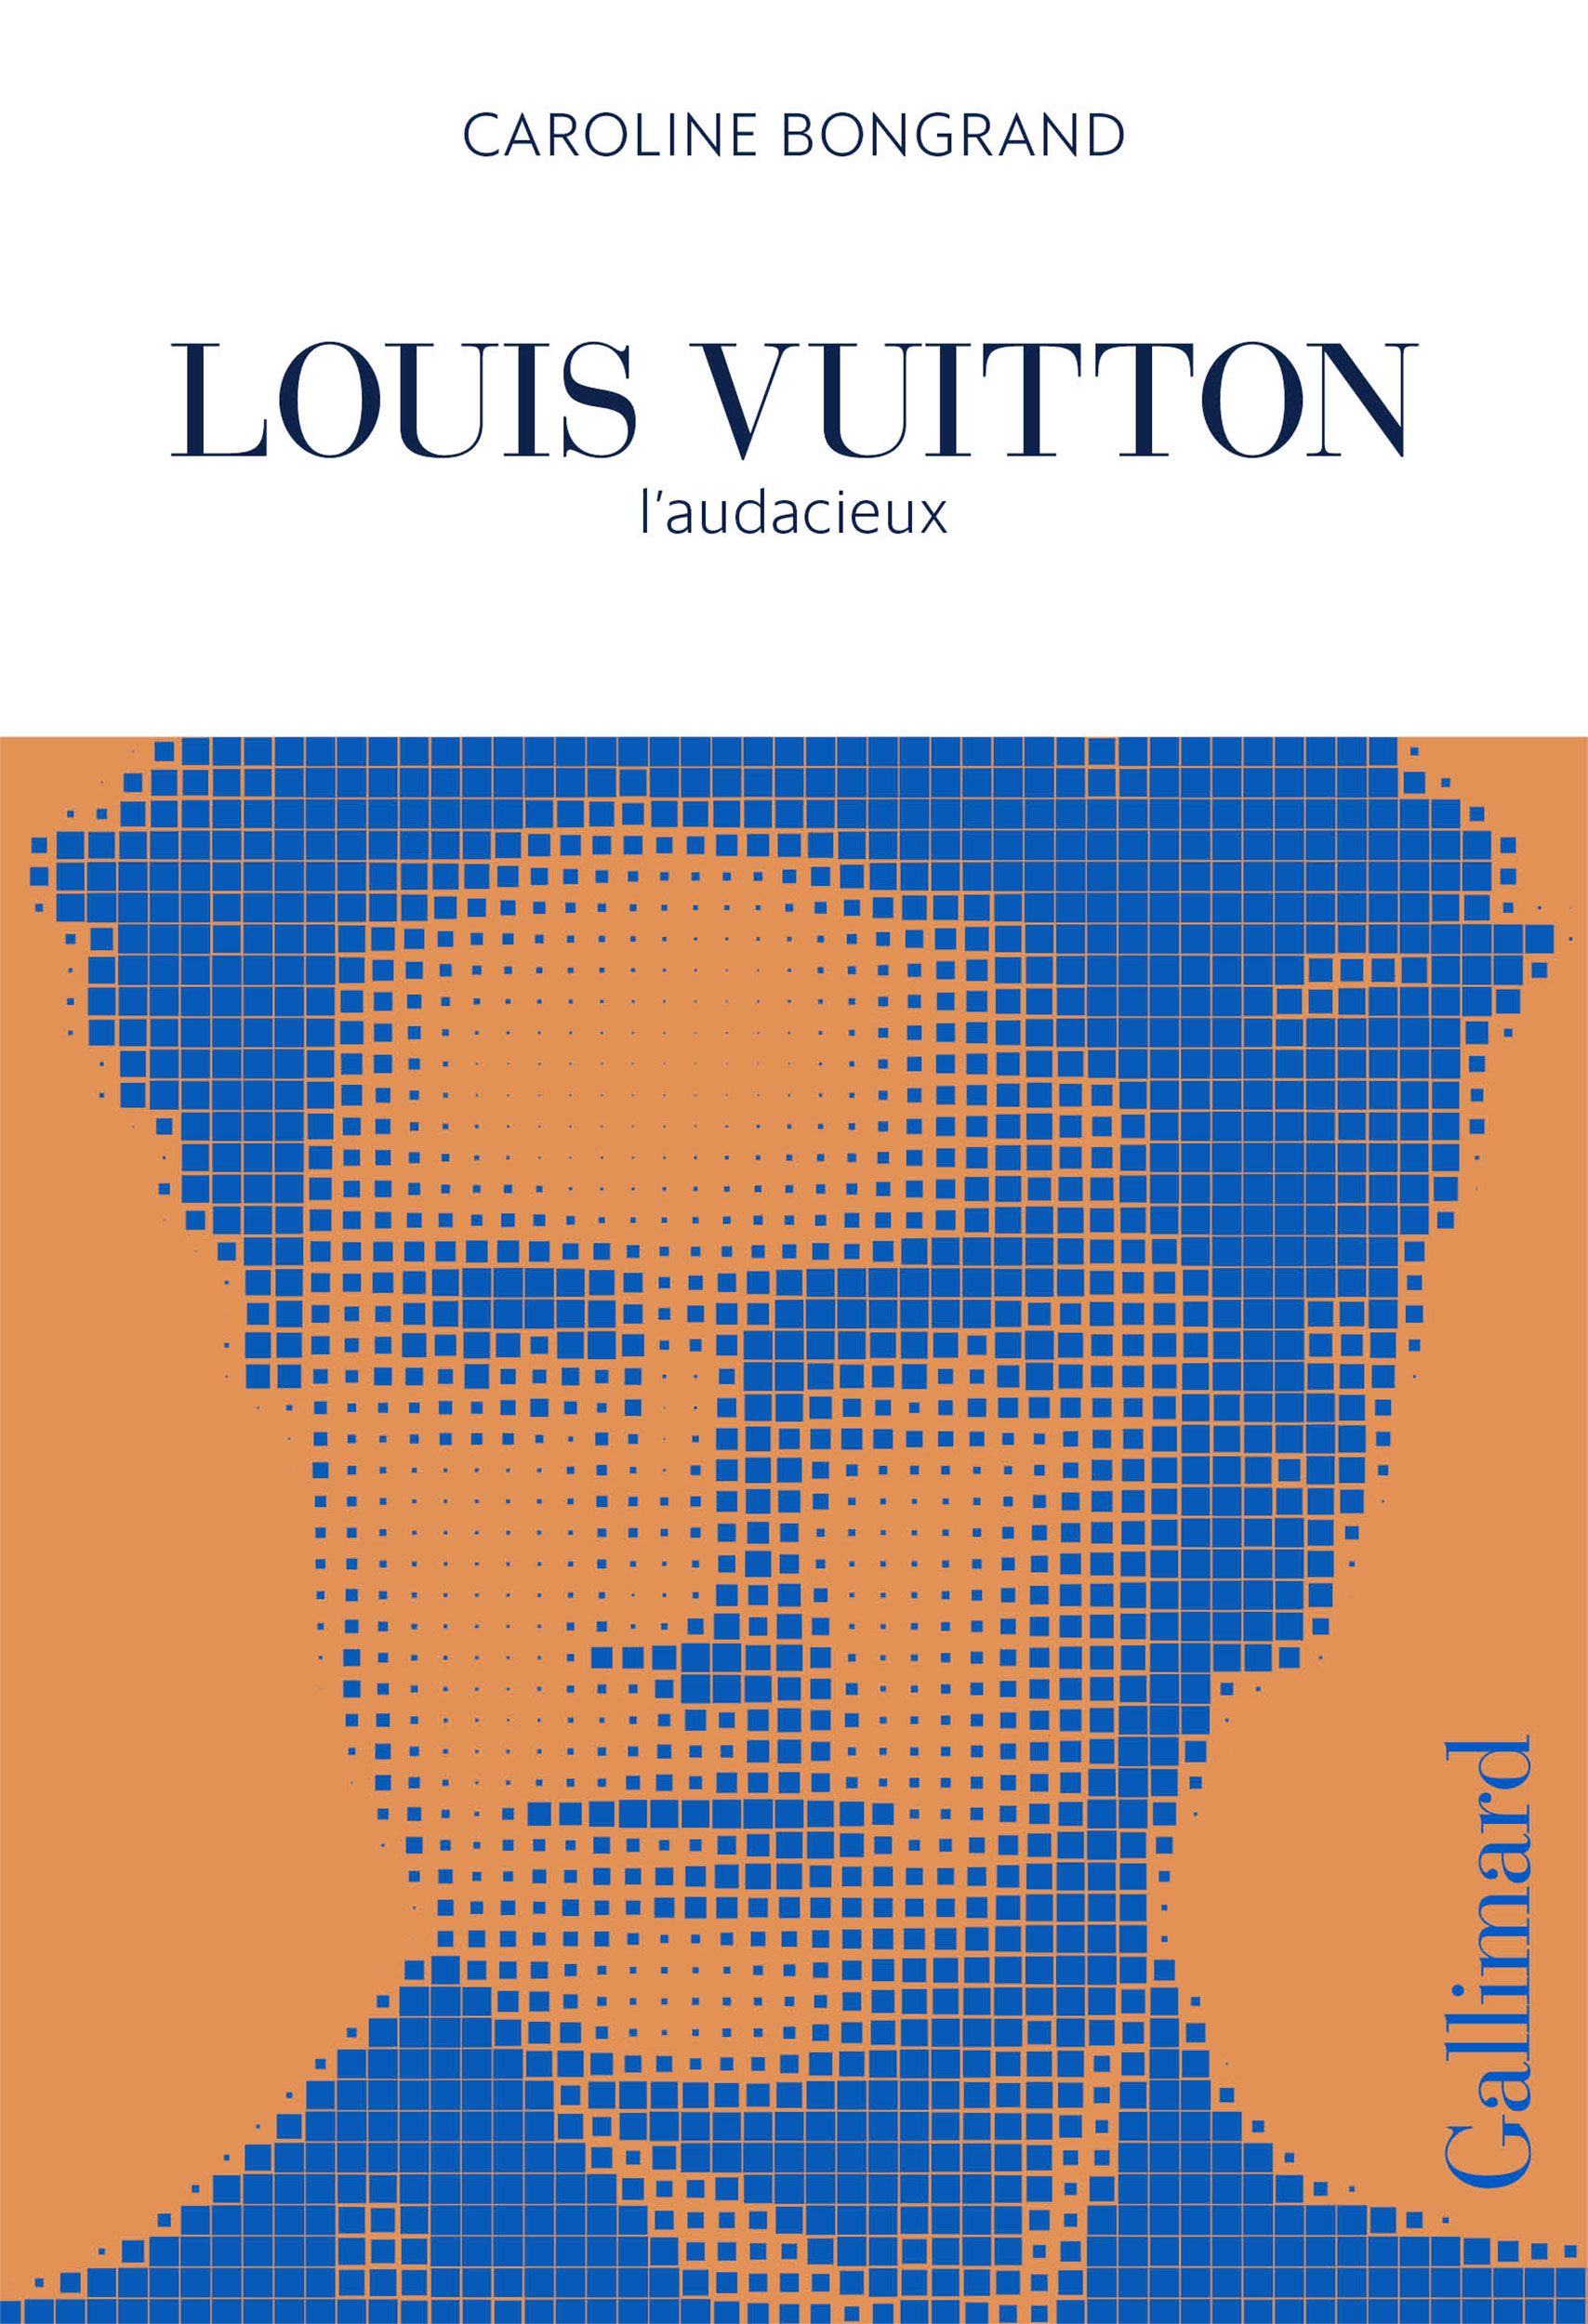 Celebrating 200 years of Louis Vuitton, the man behind the brand